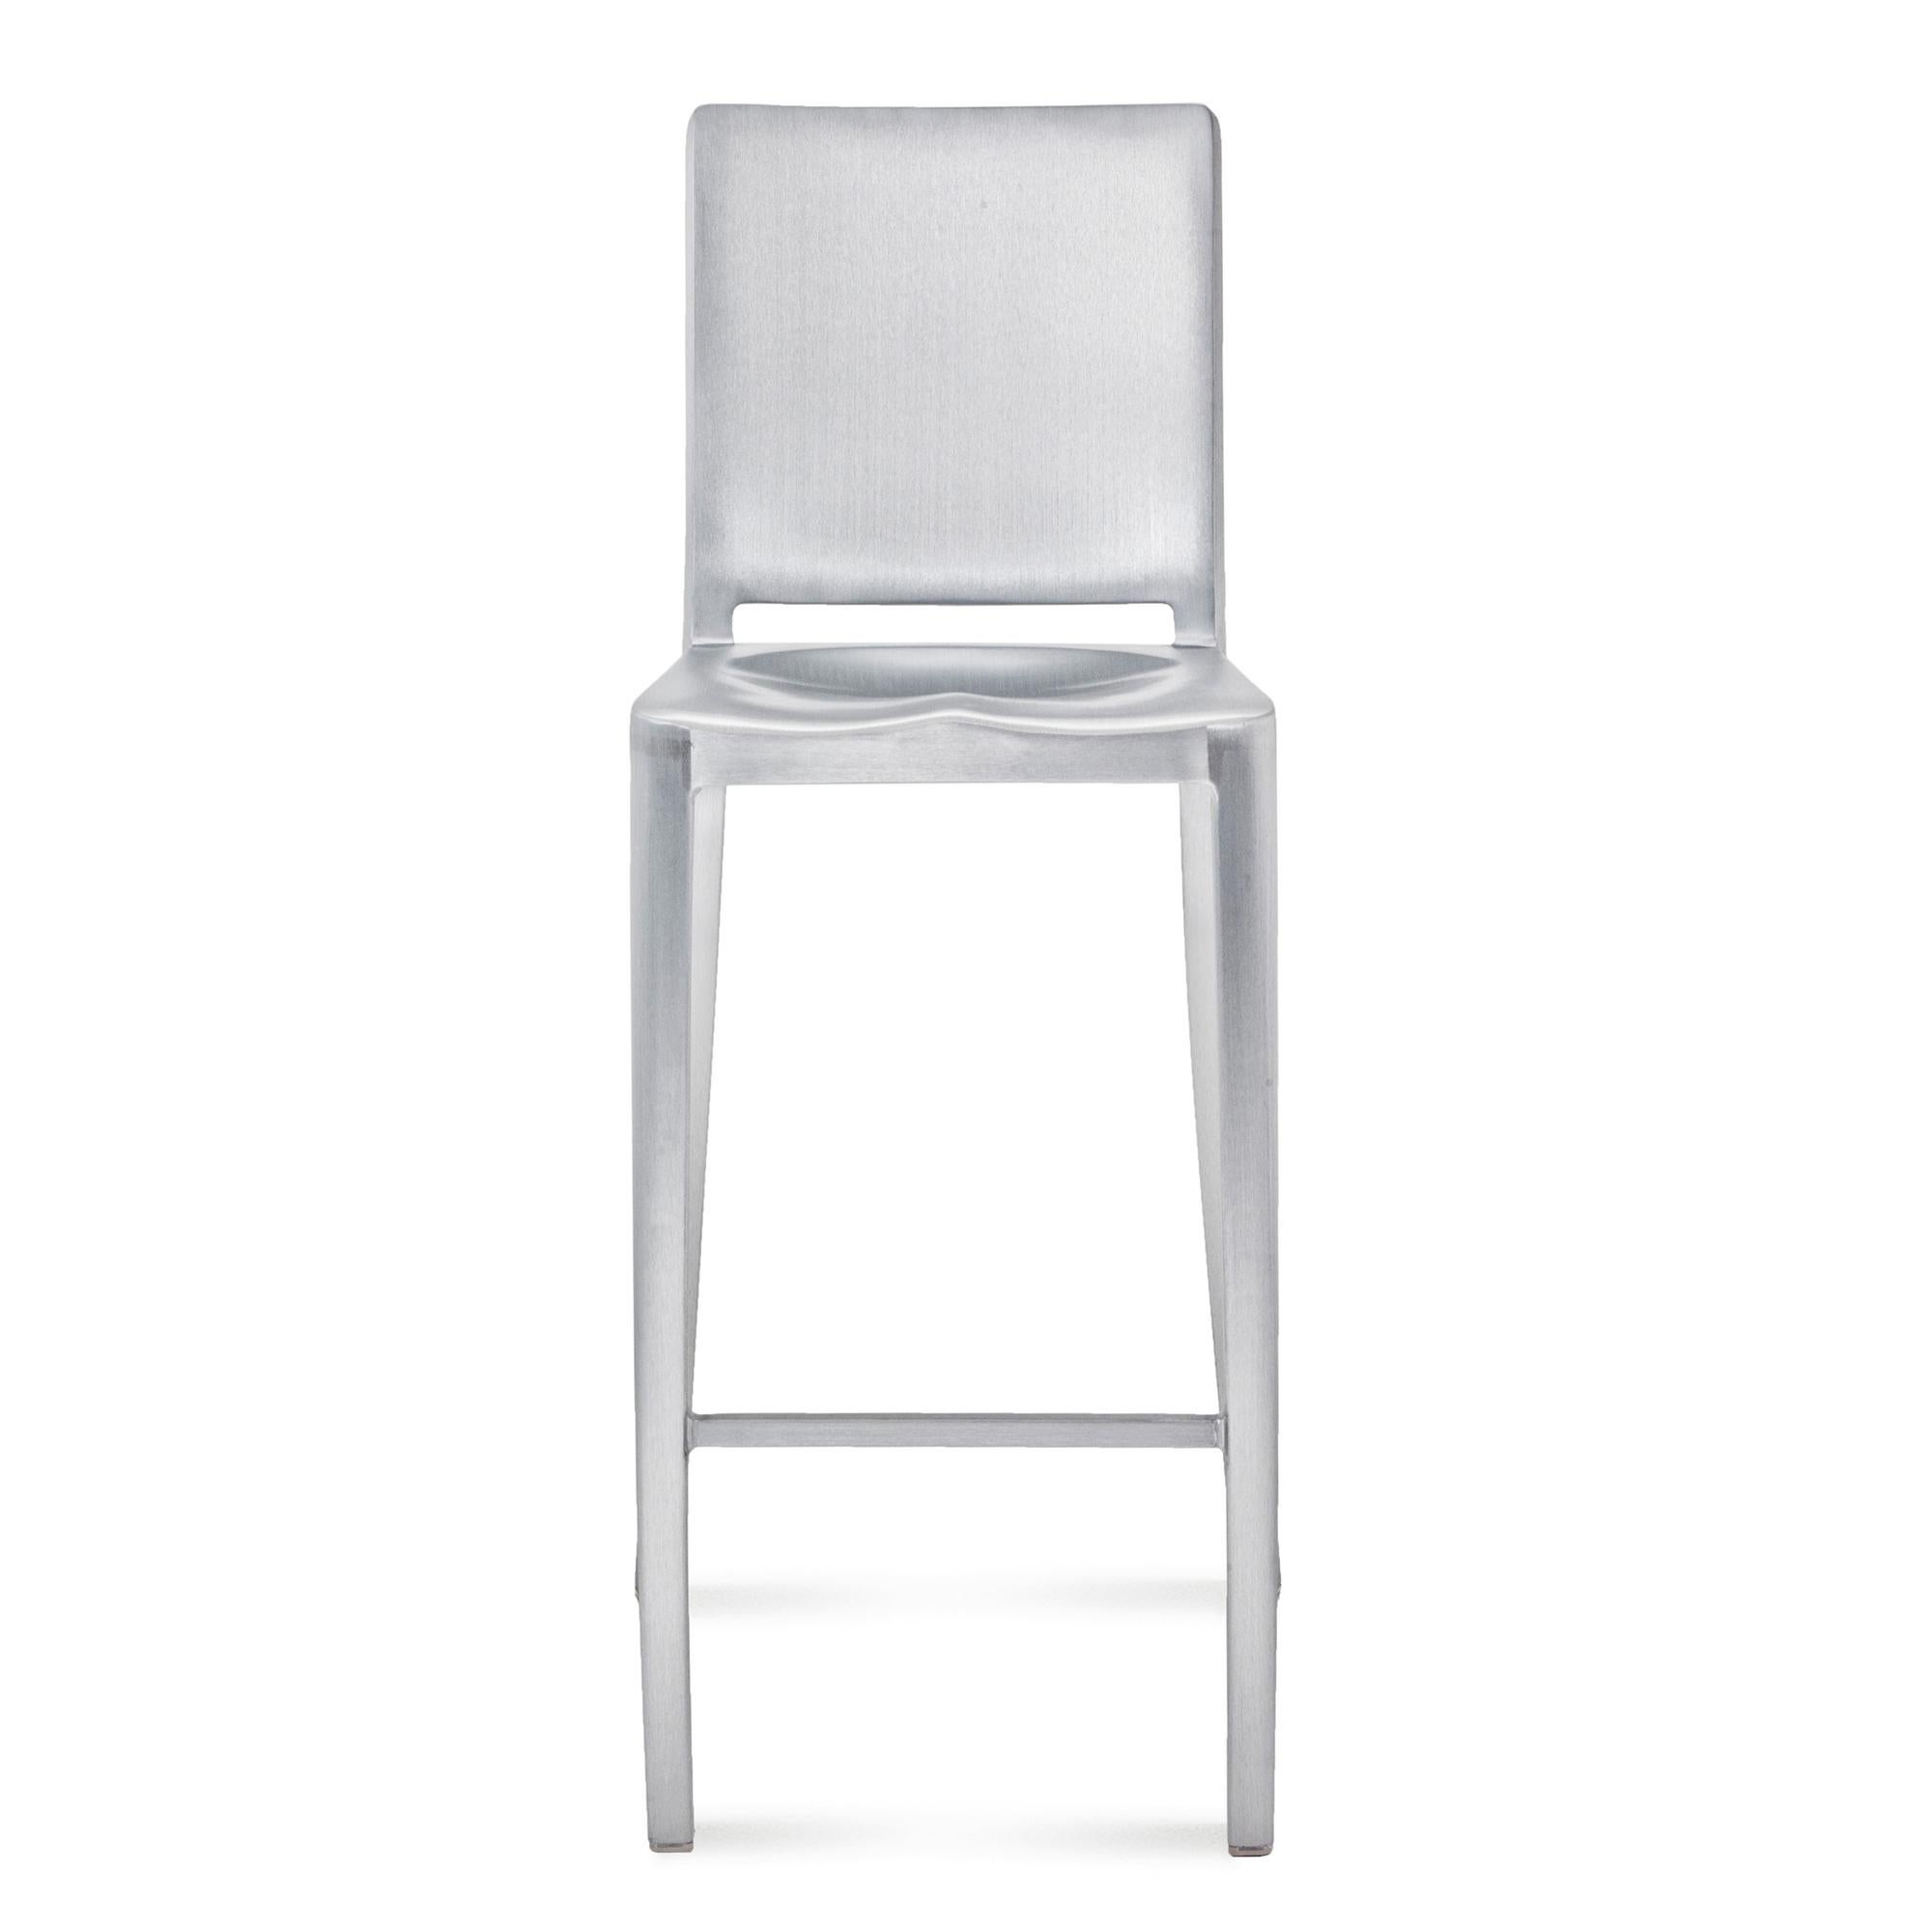 Aluminum Philippe Starck Emeco Hudson Bar Stool in Hand Brushed Stainless Steel 3 Avail